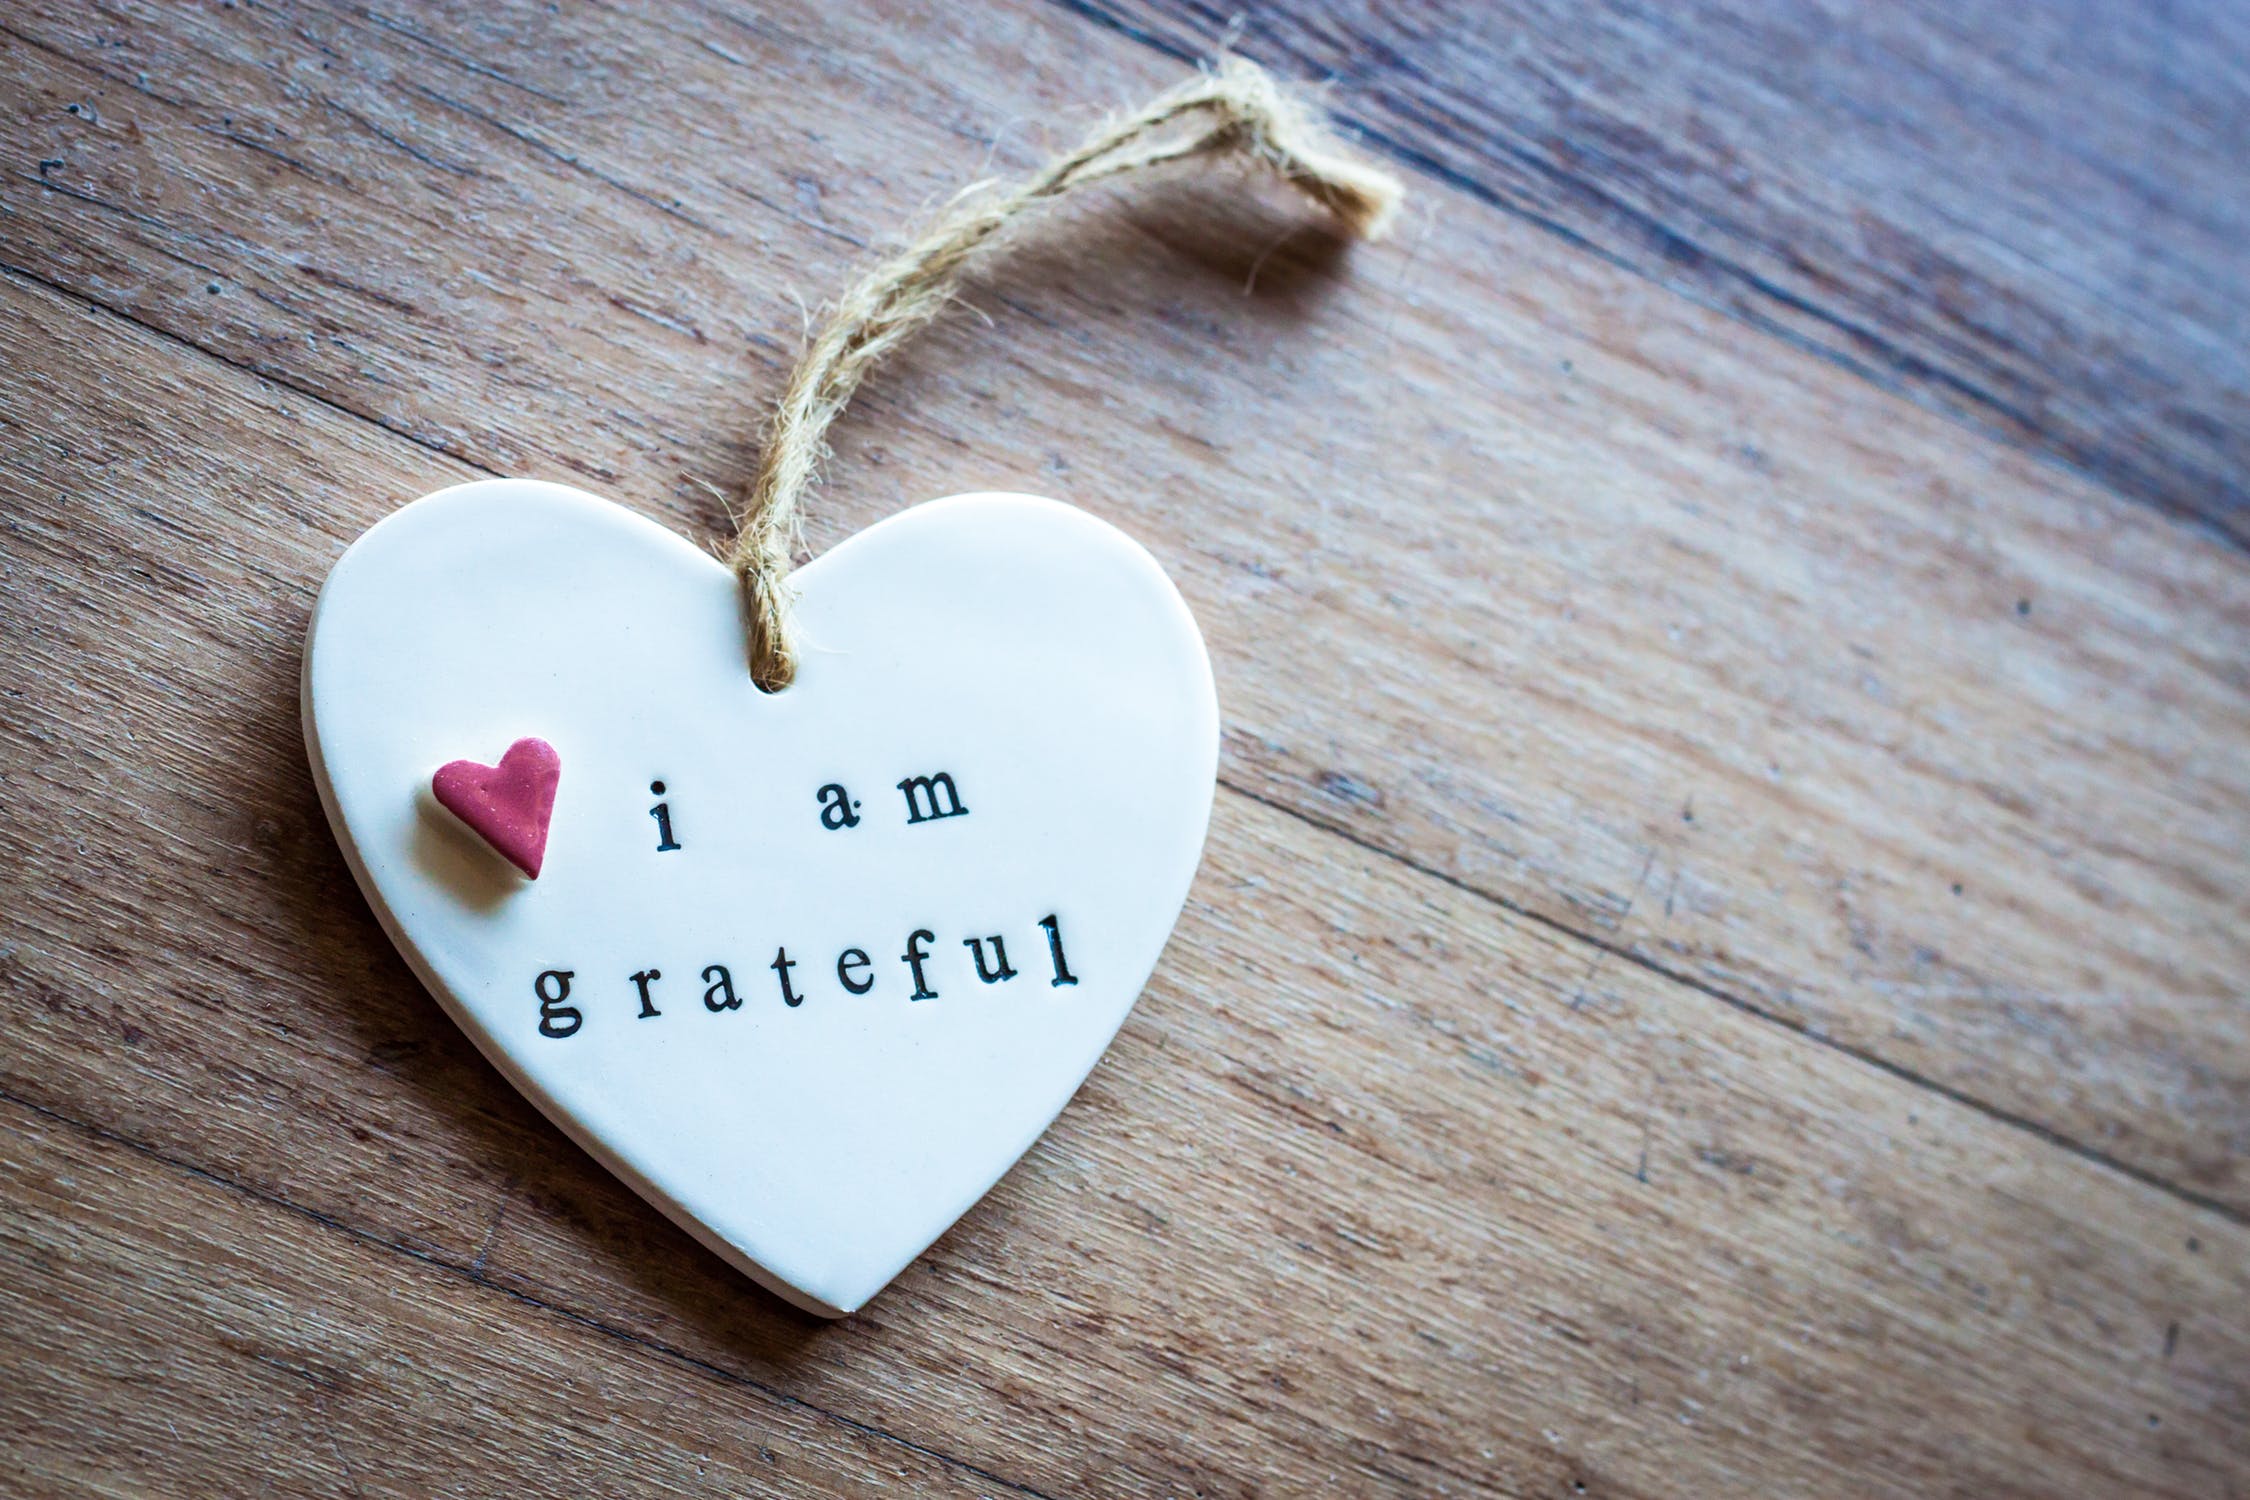 a gratitude practice will improve your life